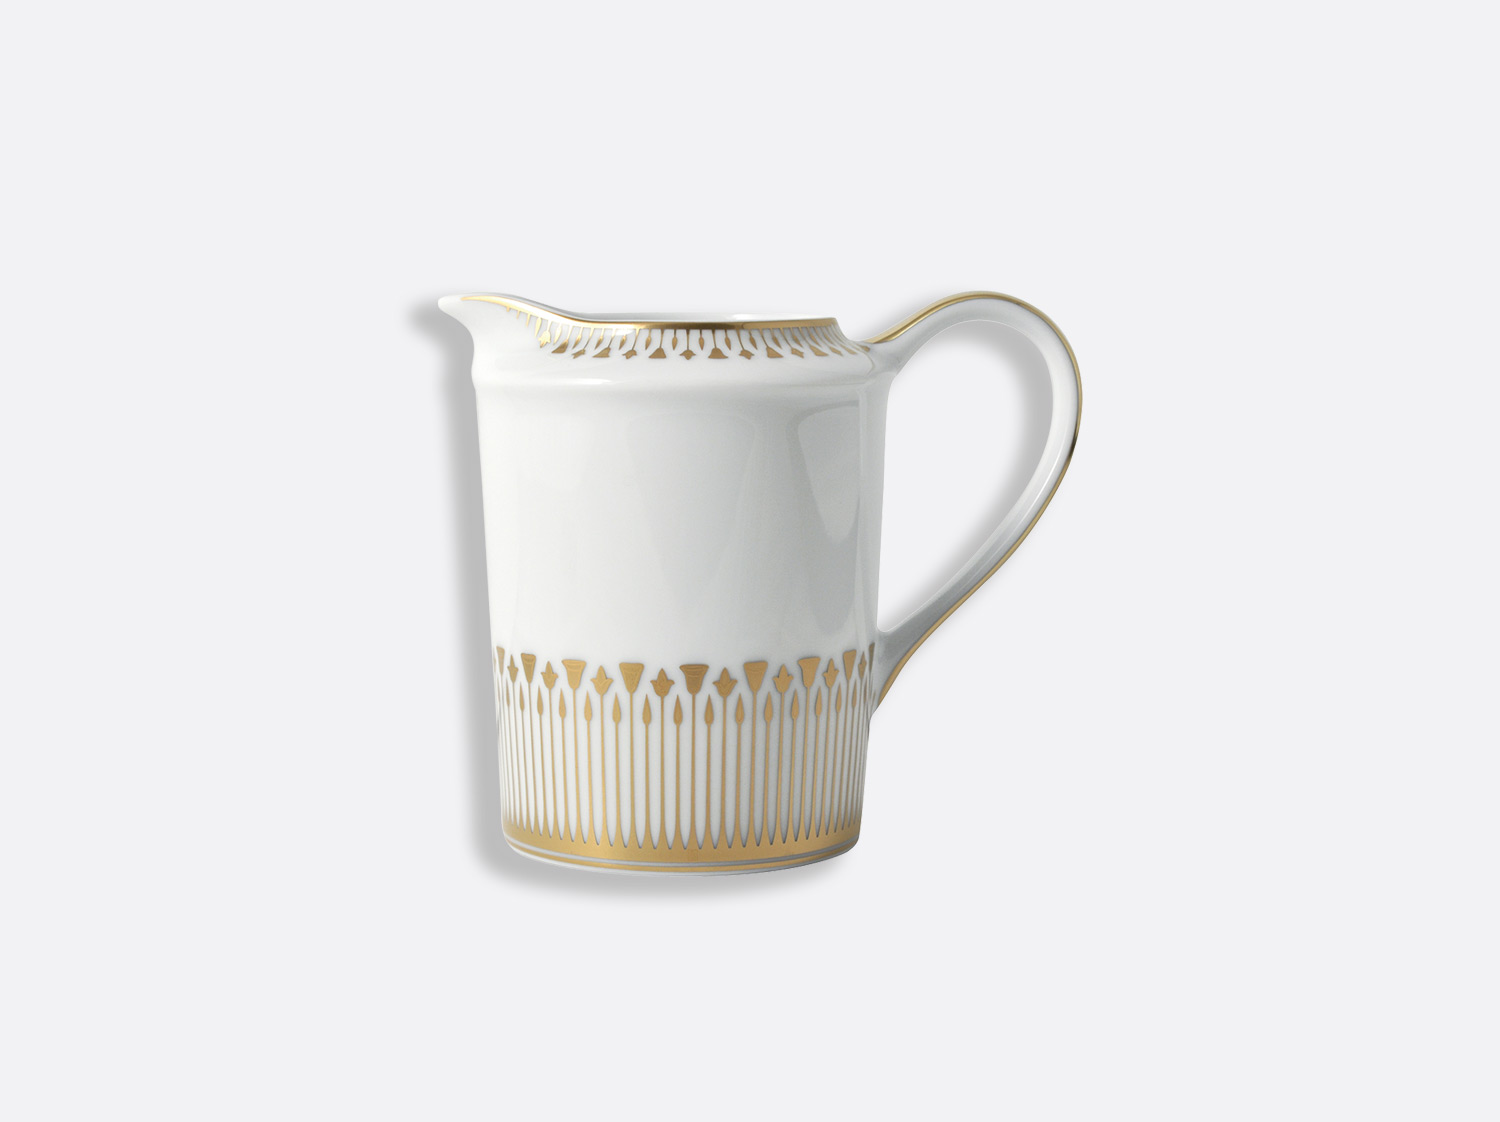 China Creamer 12 cups of the collection Soleil levant | Bernardaud